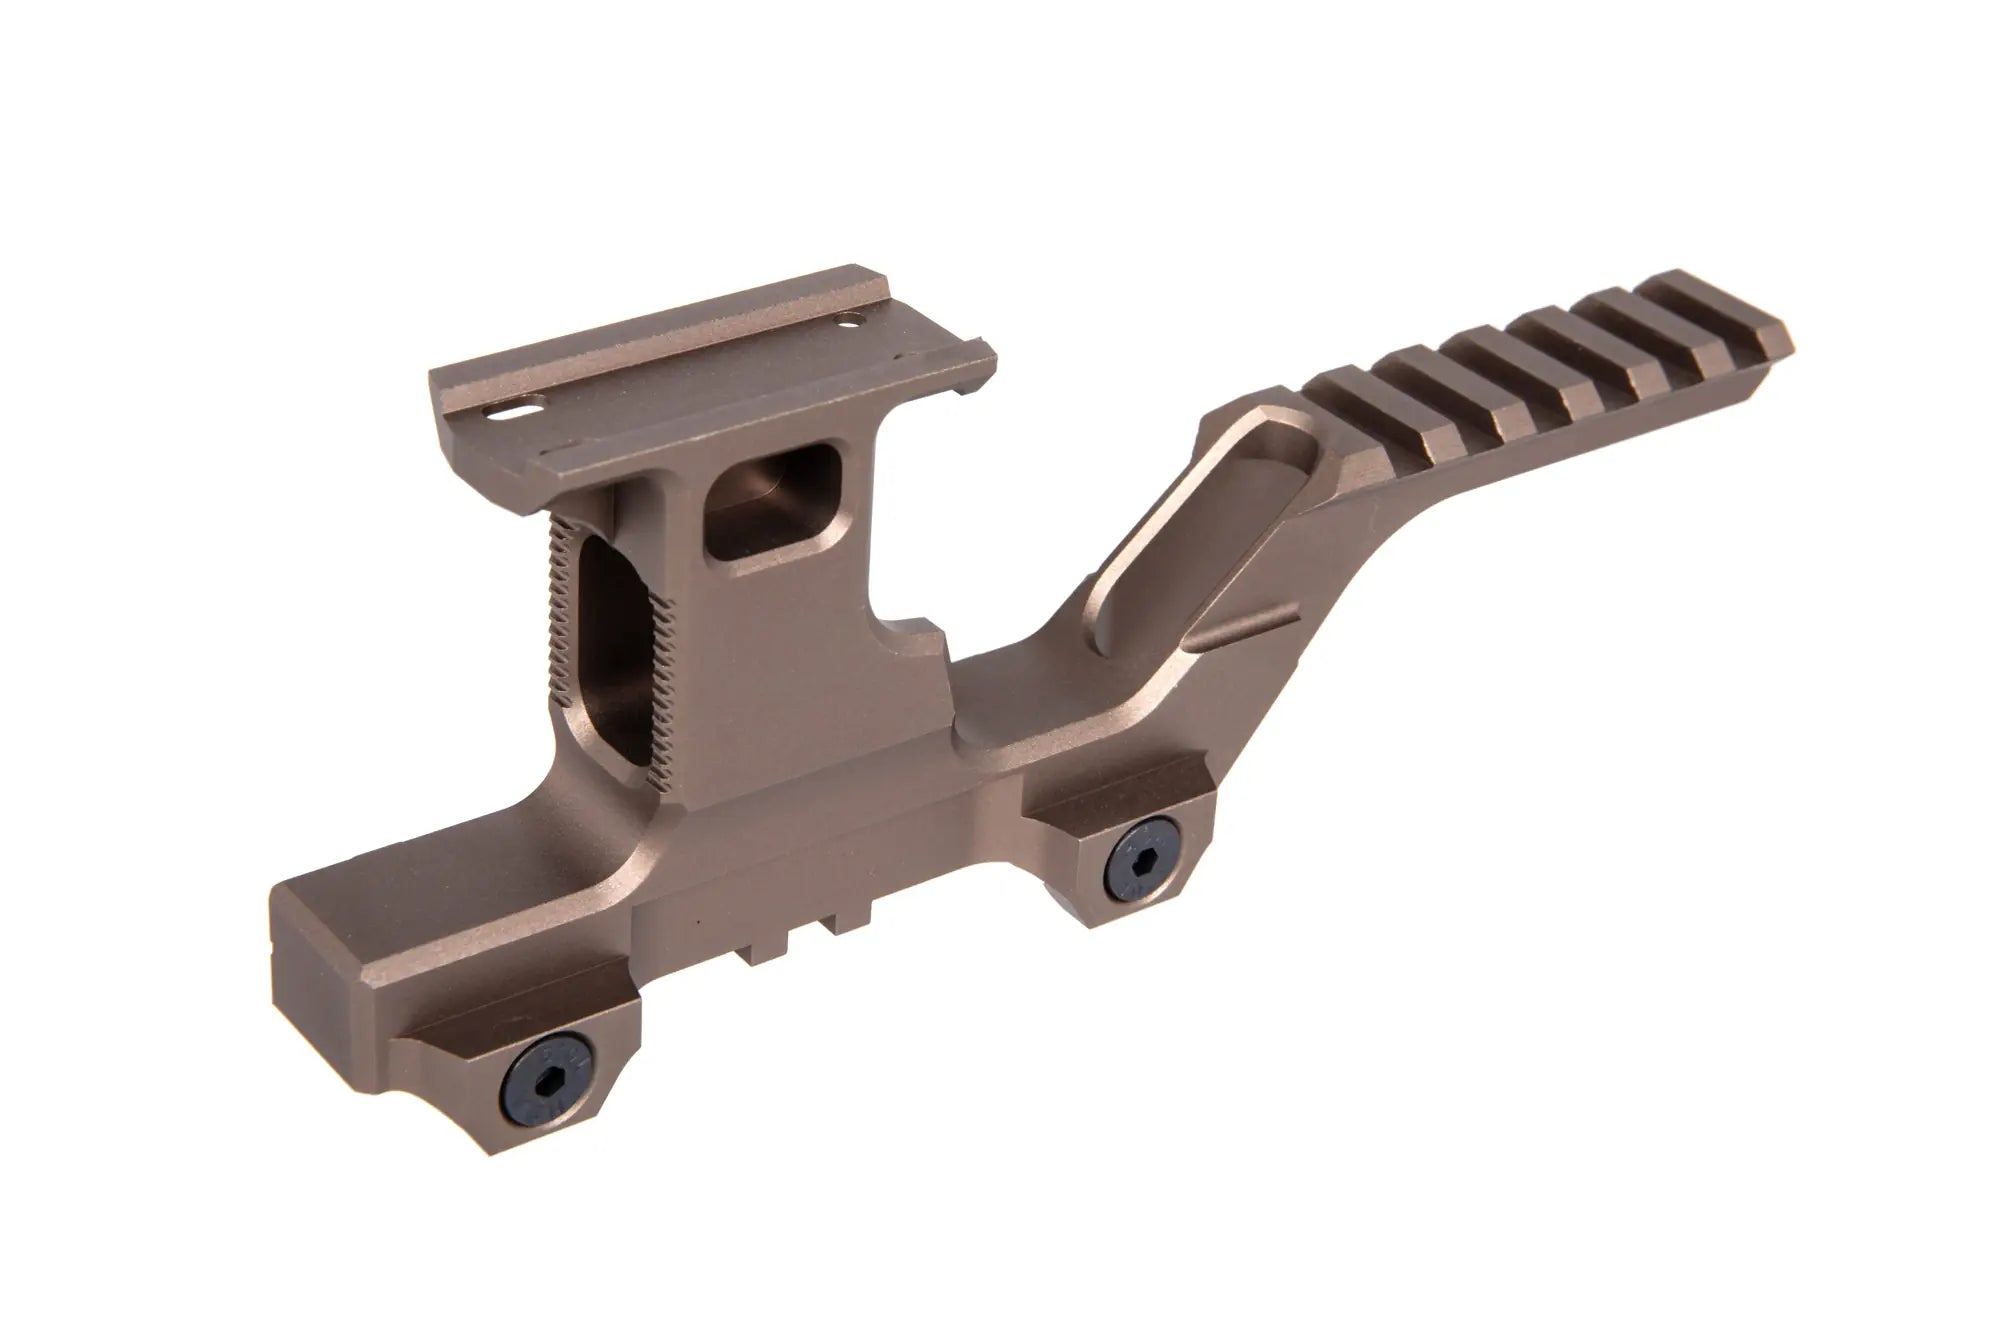 WADSN high mount for T1/T2 and PEQ FDE collimators-1